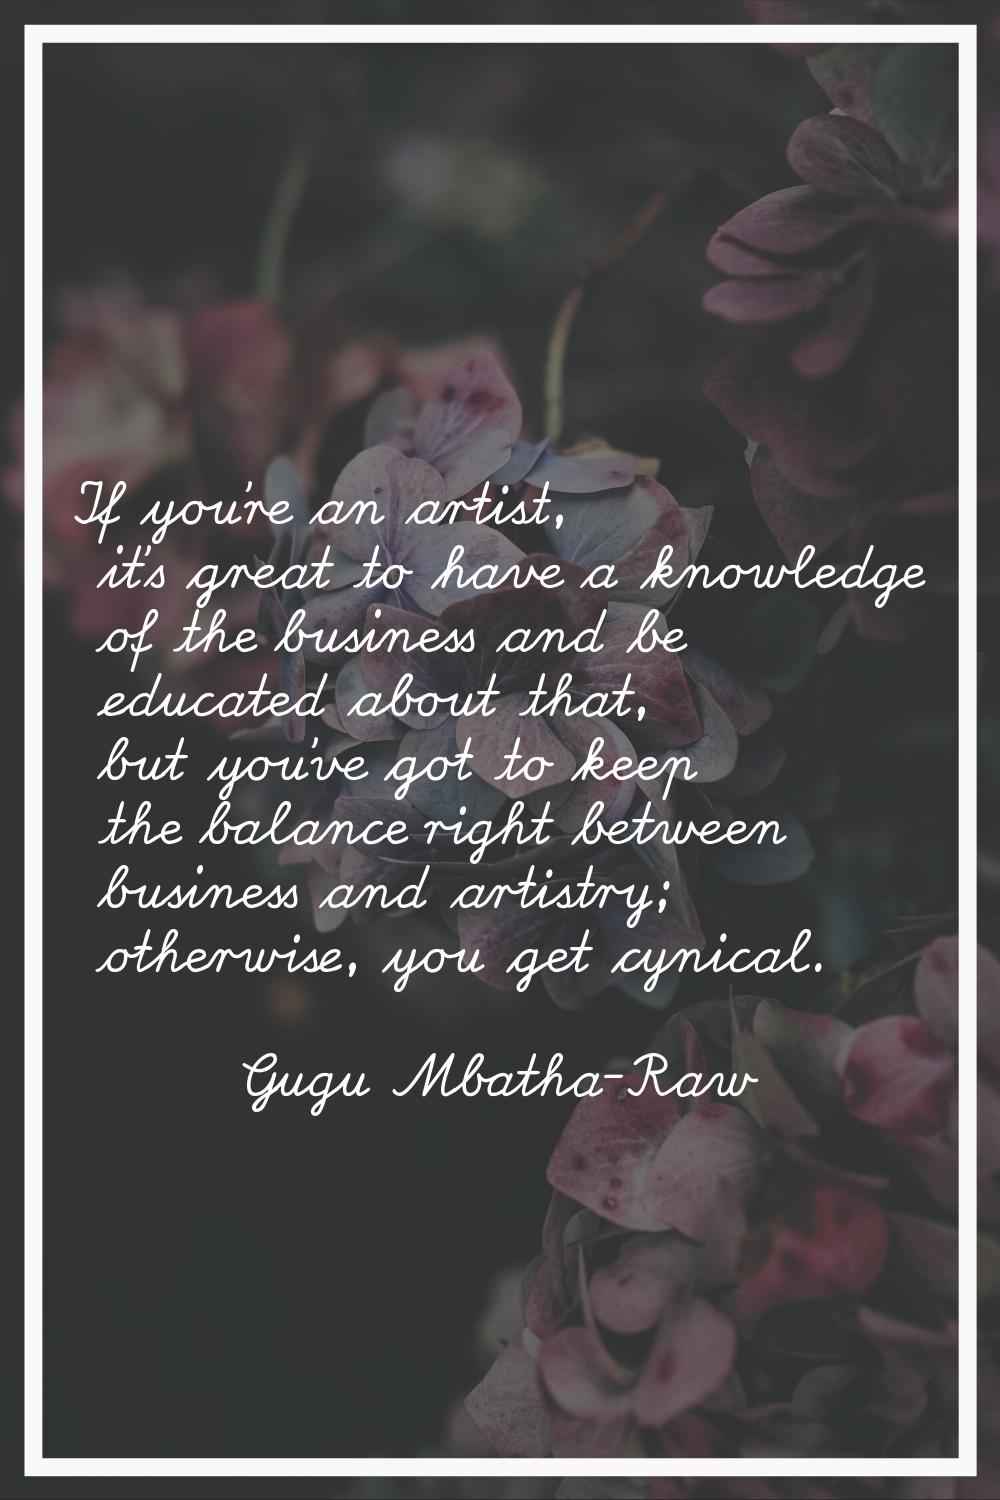 If you're an artist, it's great to have a knowledge of the business and be educated about that, but